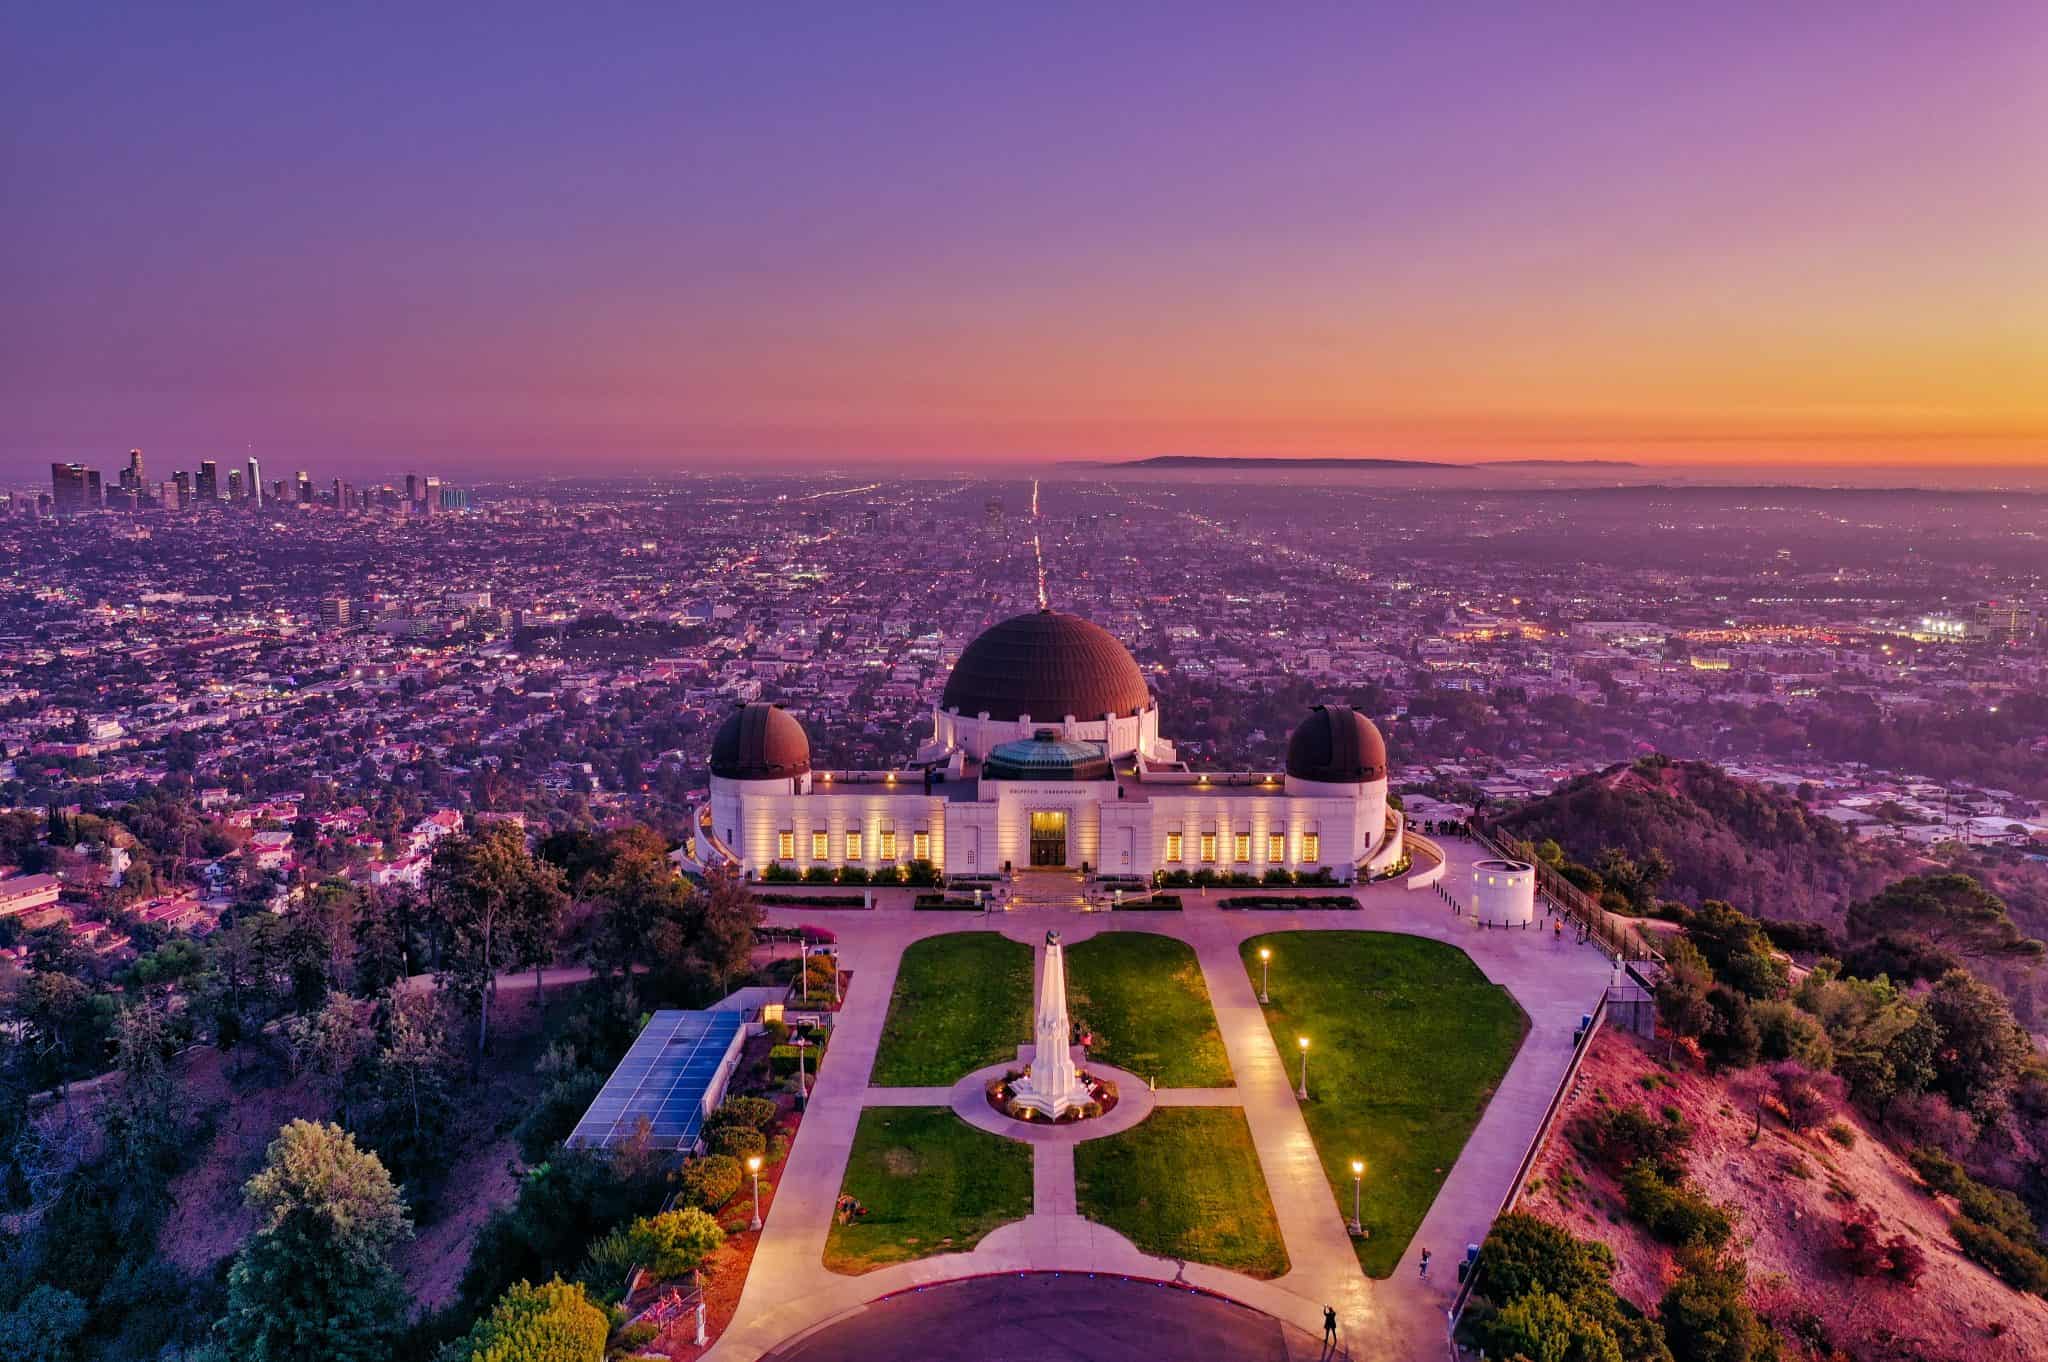 The Griffith Observatory is a beautiful place to learn more about the cosmos.  